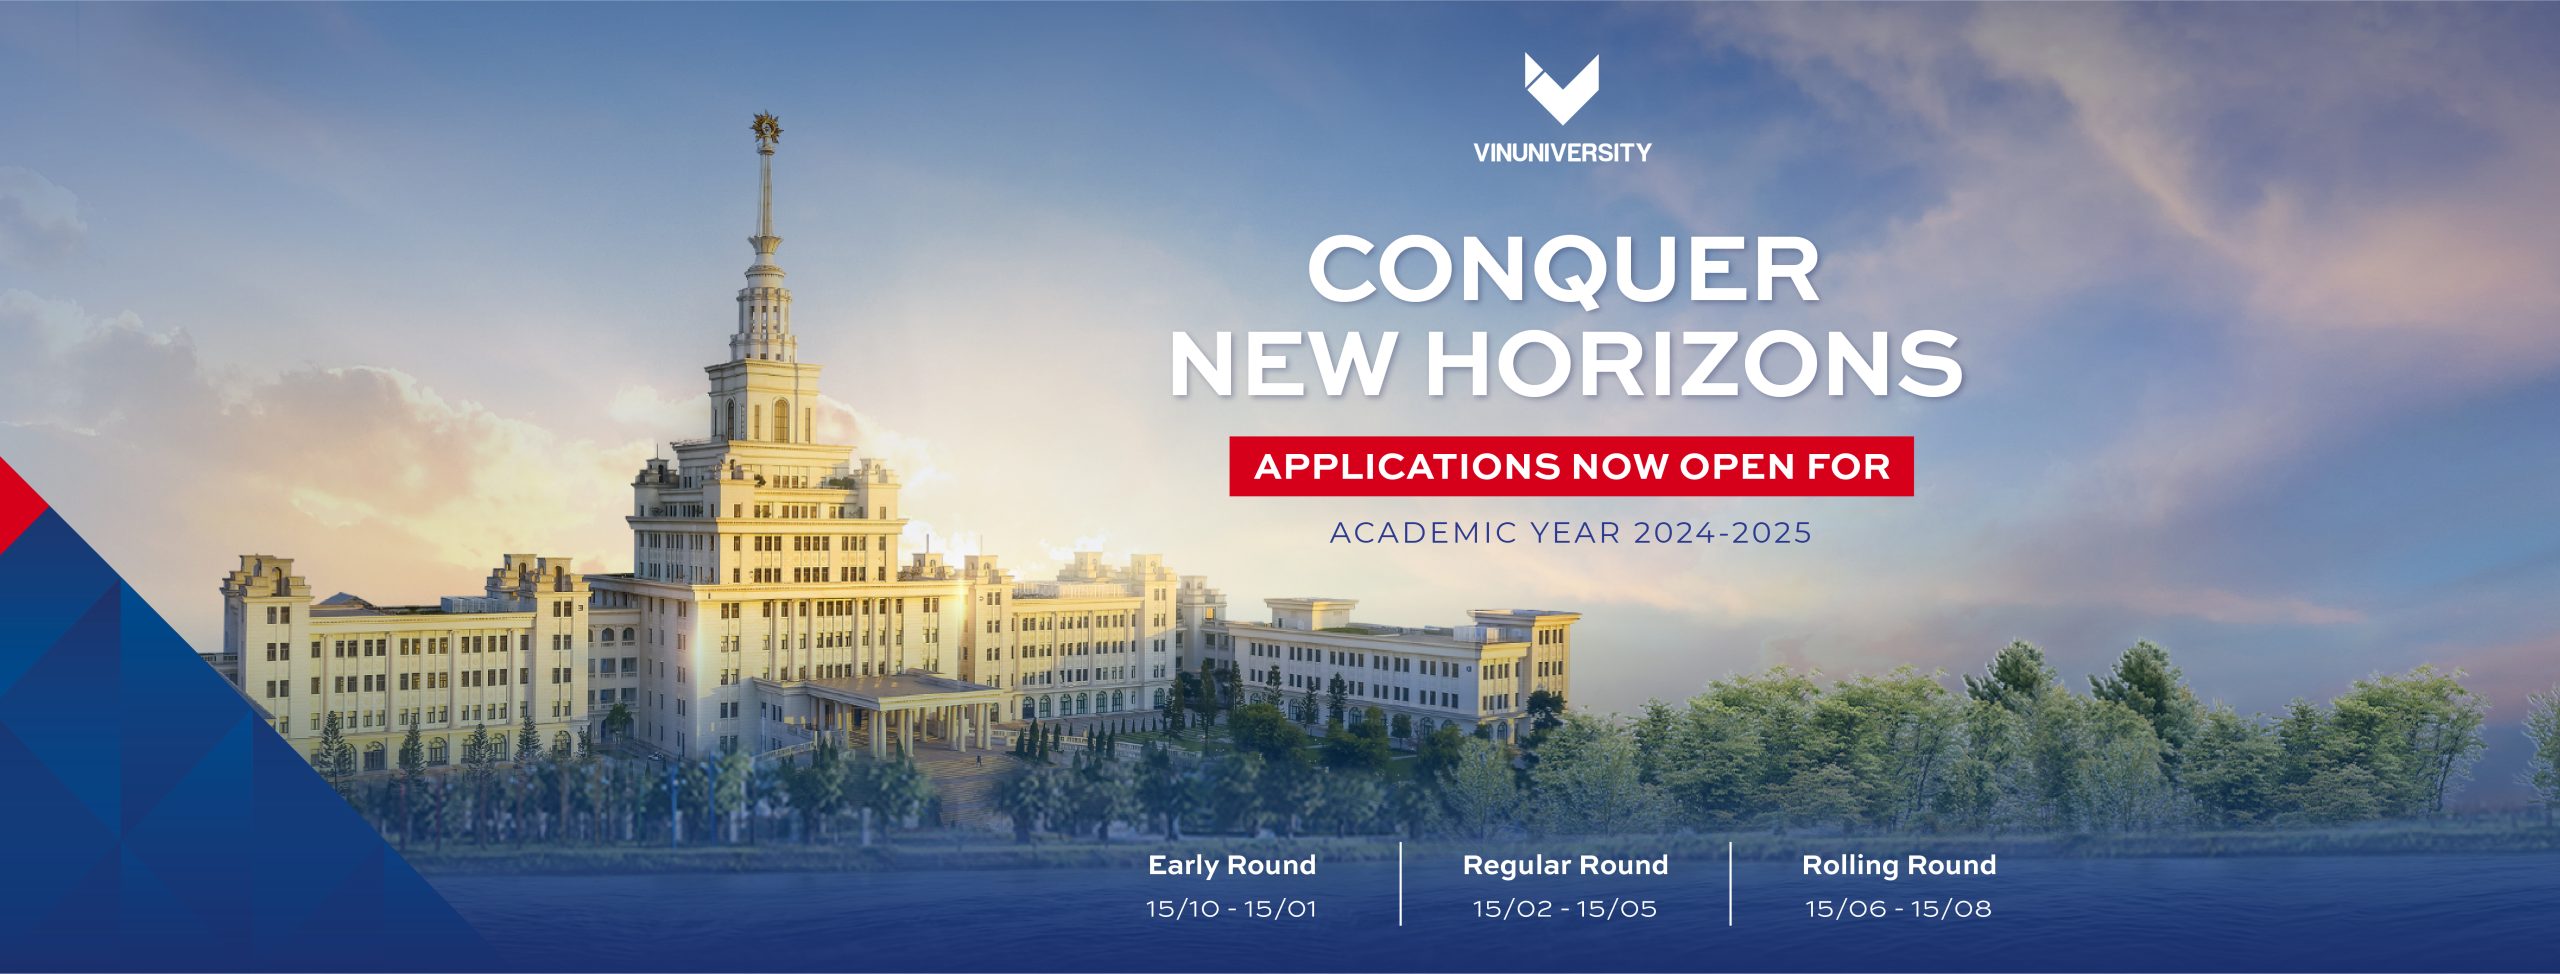 Apply to VinUni to conquer new horizons!